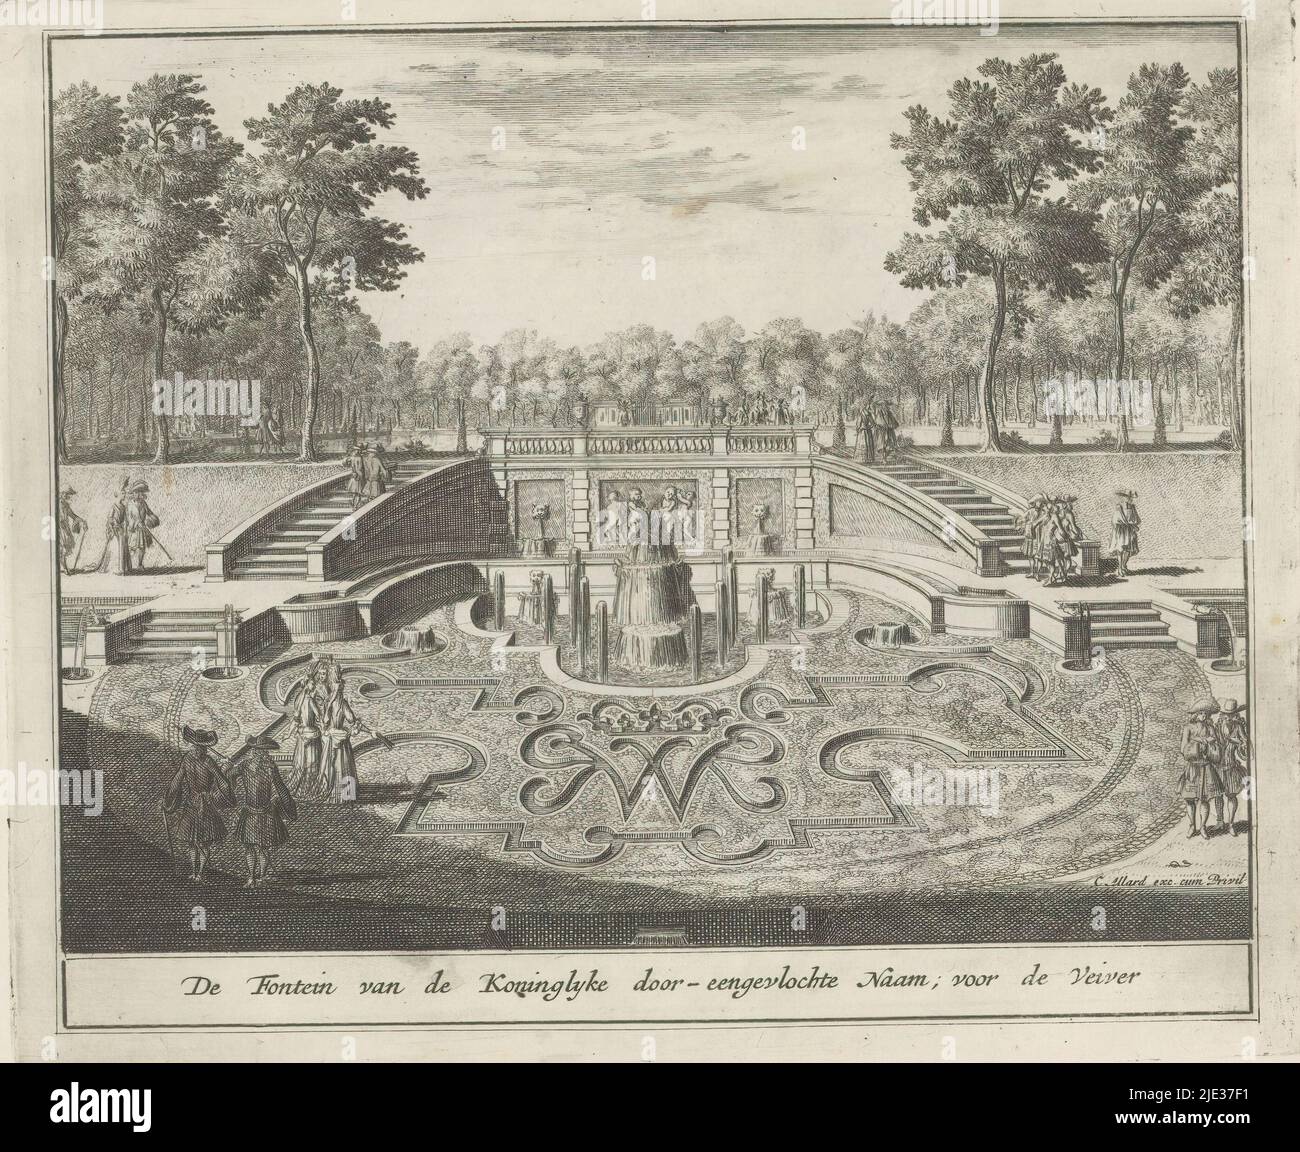 Fountain and parterre with the letters W and M interwoven, The Fountain of the King's interwoven name, in front of the river Veiver (title on object), Neerlands Veldpracht, Of 't Lust Hof gesticht door Z.B.M. Willem III op 't Lo (...) (series title), View of a parterre with the letters W and M interwoven in the gardens of Paleis Het Loo. Print is part of an album., print maker: Laurens Scherm, after drawing by: Laurens Scherm, publisher: Carel Allard, (mentioned on object), Amsterdam, 1689 - 1701 and/or 1702, paper, etching, height 172 mm × width 206 mm Stock Photo